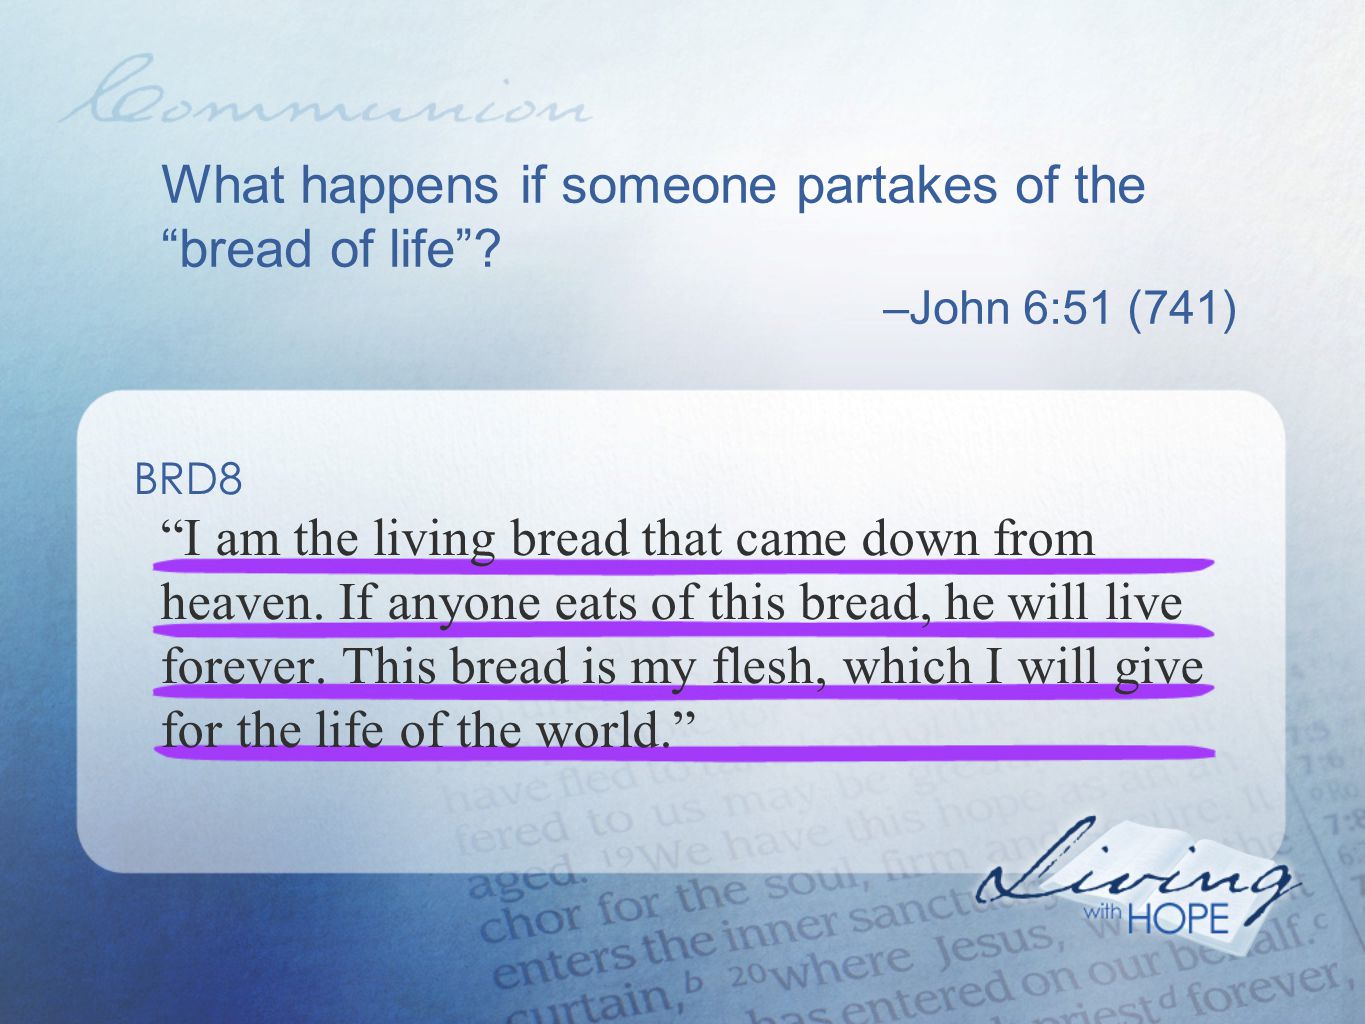 What happens if someone partakes of the bread of life